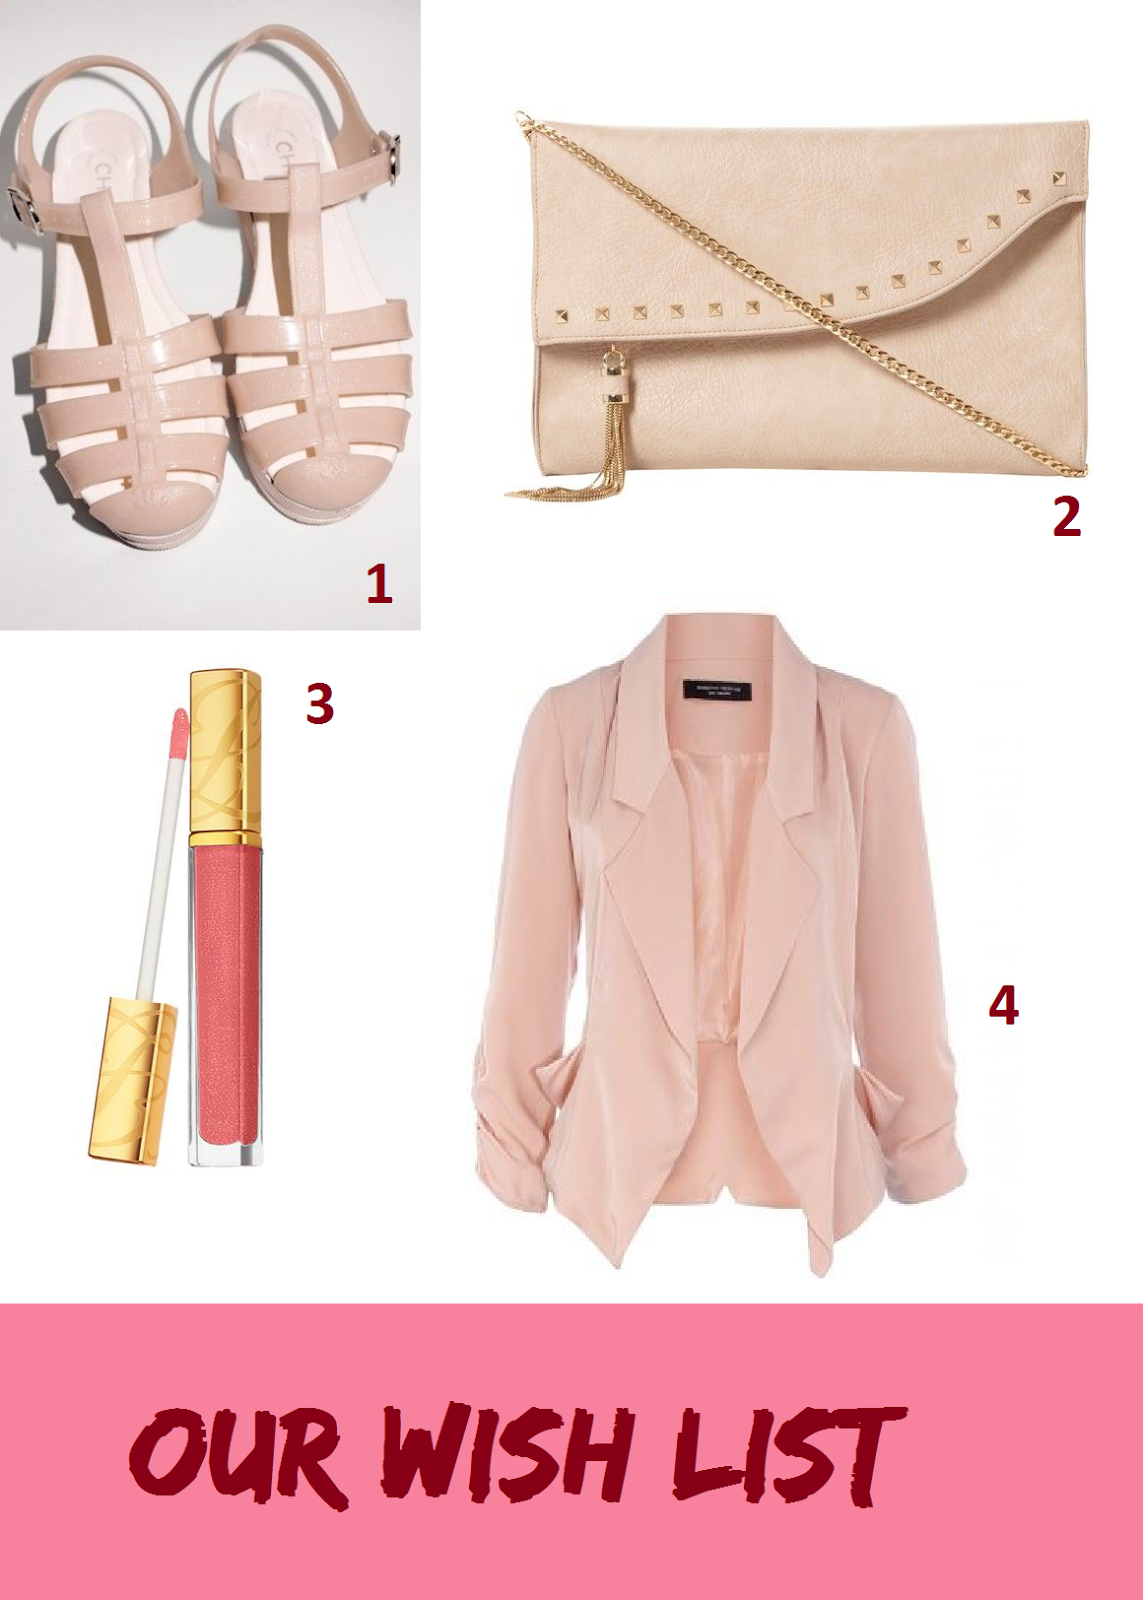 MISYELLE STORE BLOG: 25 Stylish Work Outfit Ideas To Wear This Month